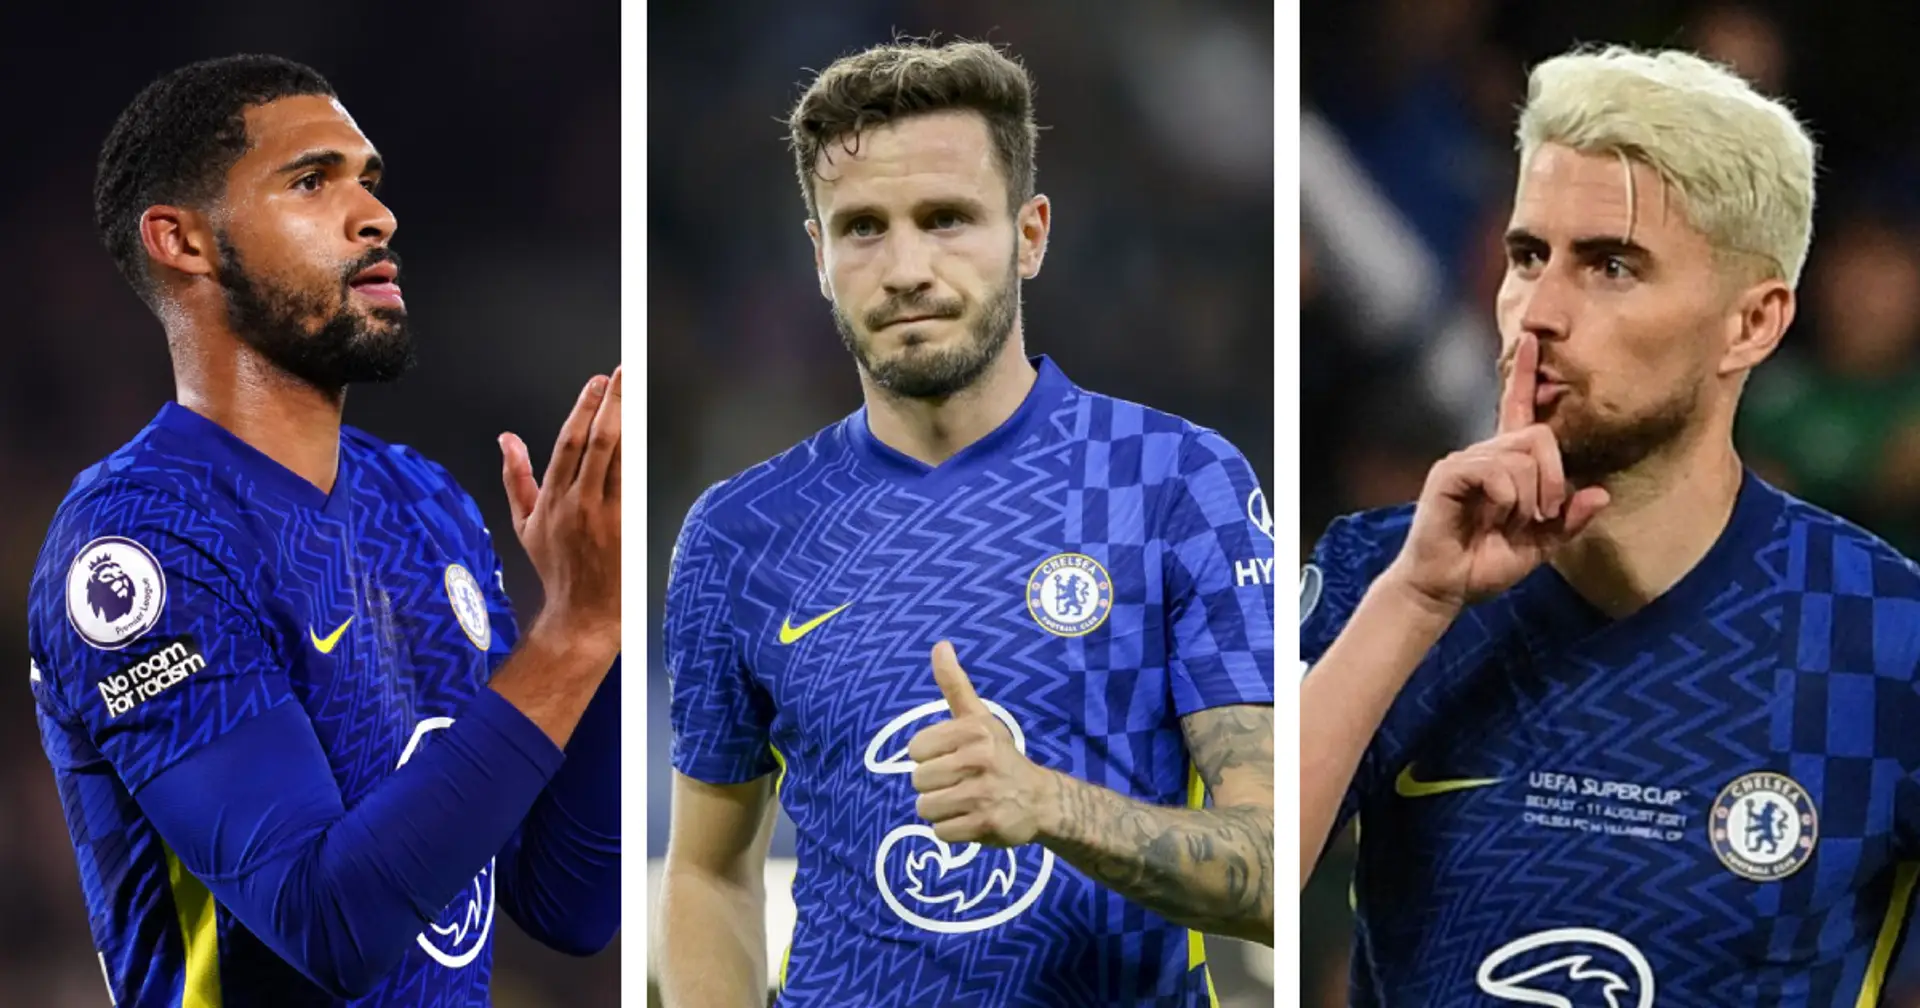 Jorginho first, bad news for Saul: most minutes played among Chelsea midfielders this season